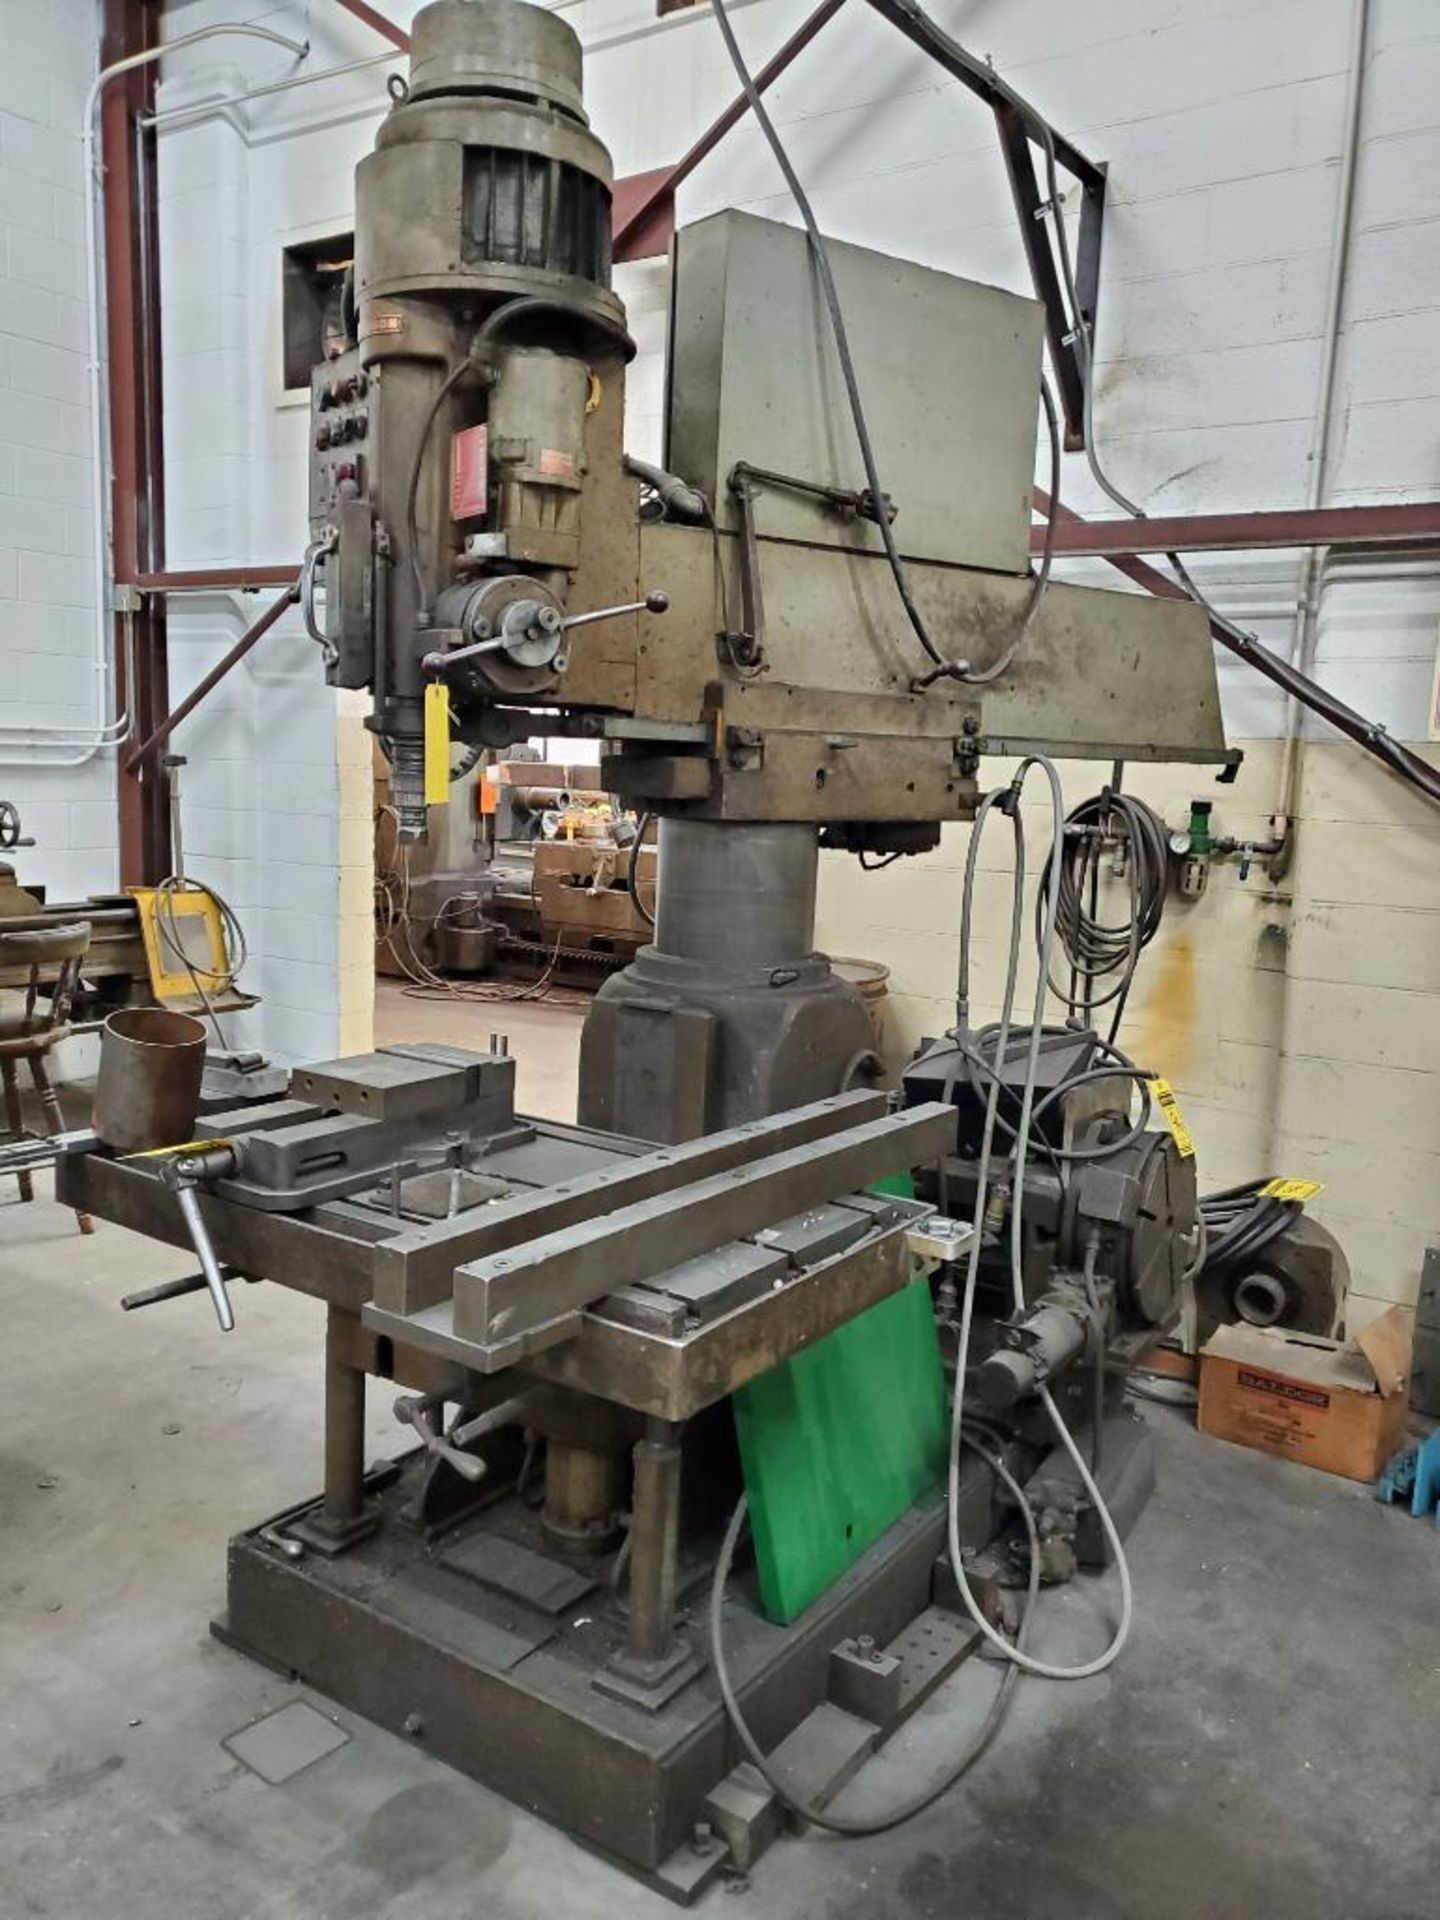 Johansson Radial Arm Drill, 67" Traverse Arm, 45" X 22" Knee Bed Front Table, 24" X 24" X 20" Angle - Image 4 of 14